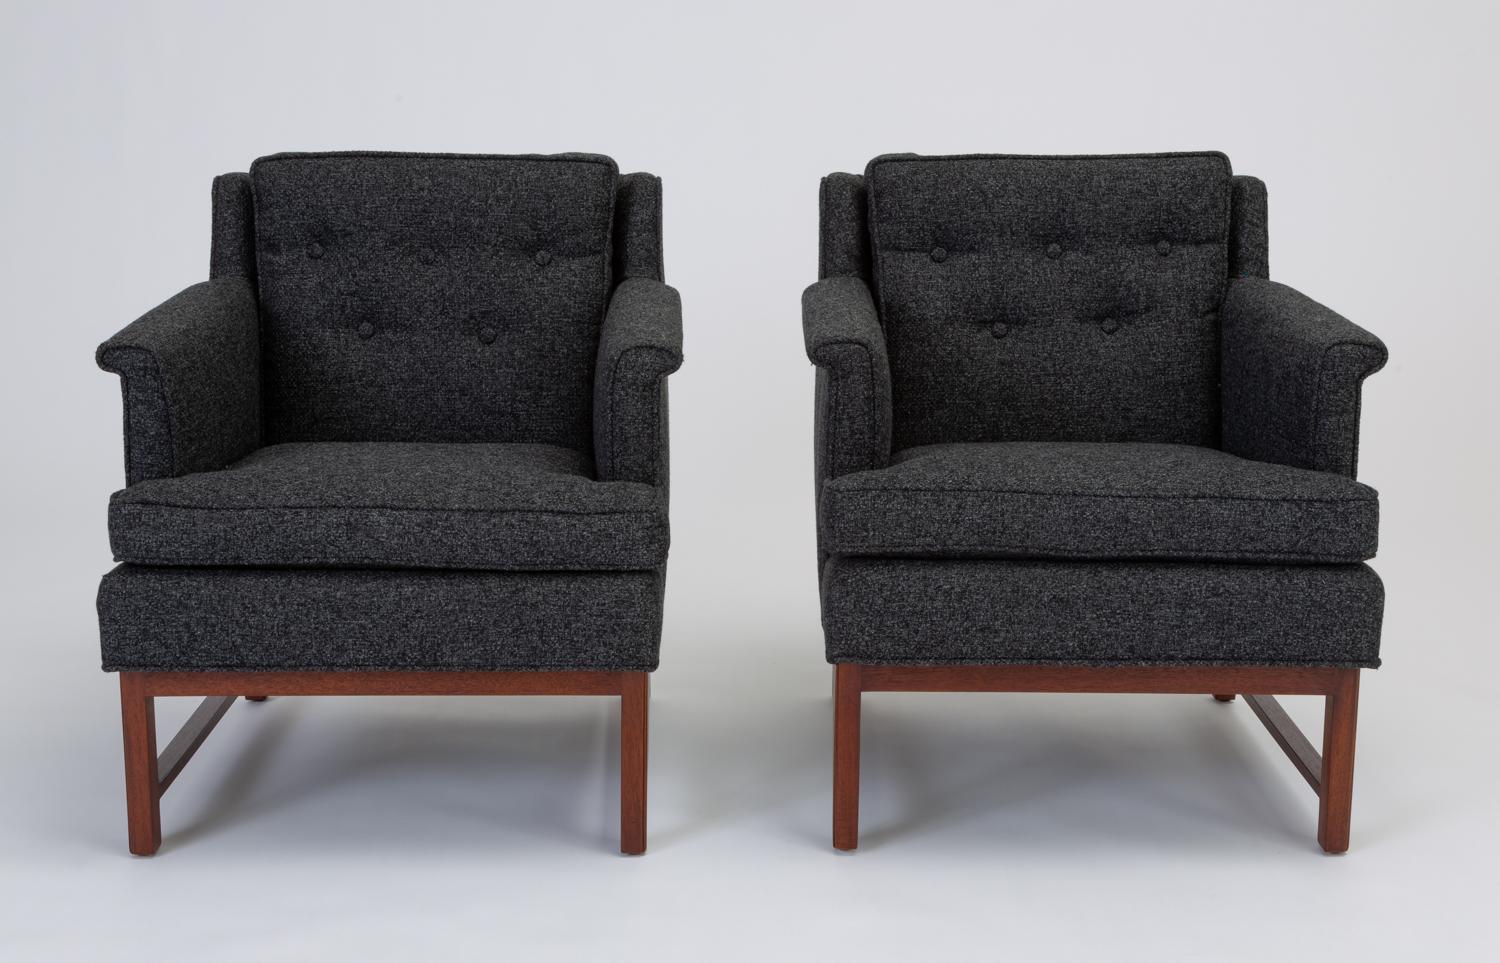 A pair of lounge chairs, upholstered in a heather midnight blue fabric, designed by Edward Wormley for Dunbar. The fully restored pair have a cubic design, with a slightly angled backrest and key arms. The body of the chair sits on a walnut-stained